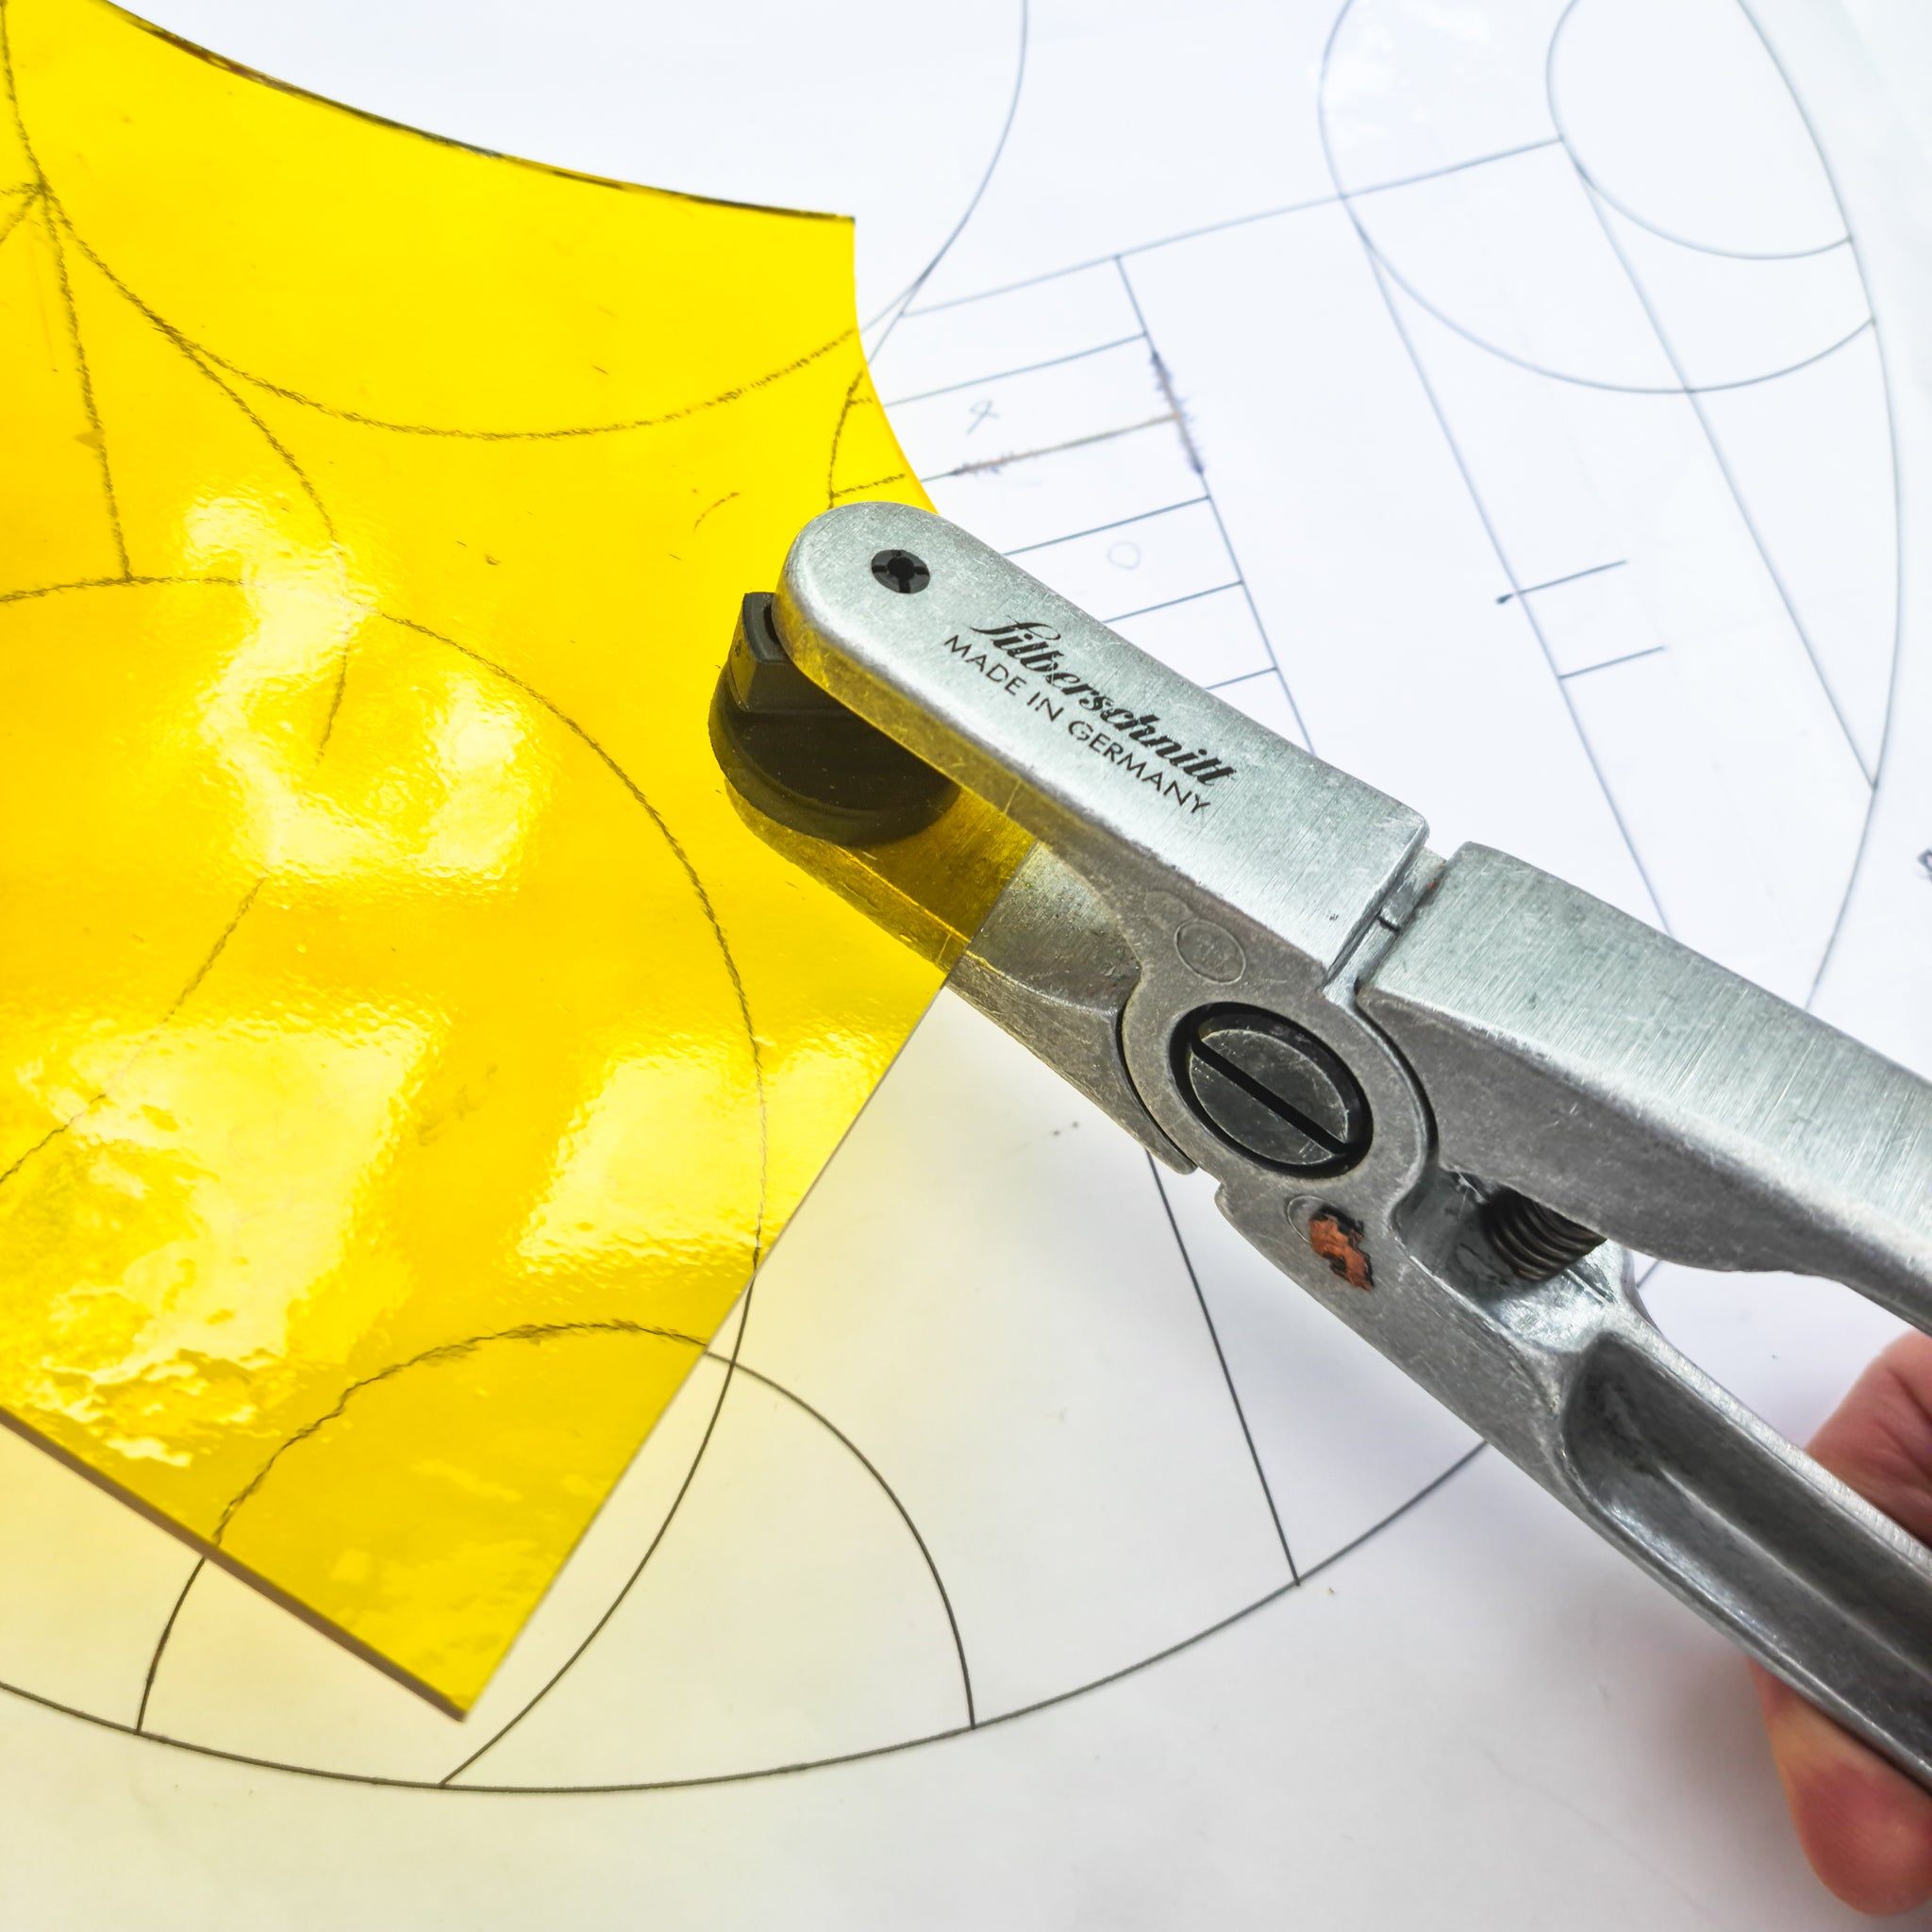 How to Use the Silberschnitt Pliers for Stained Glass 